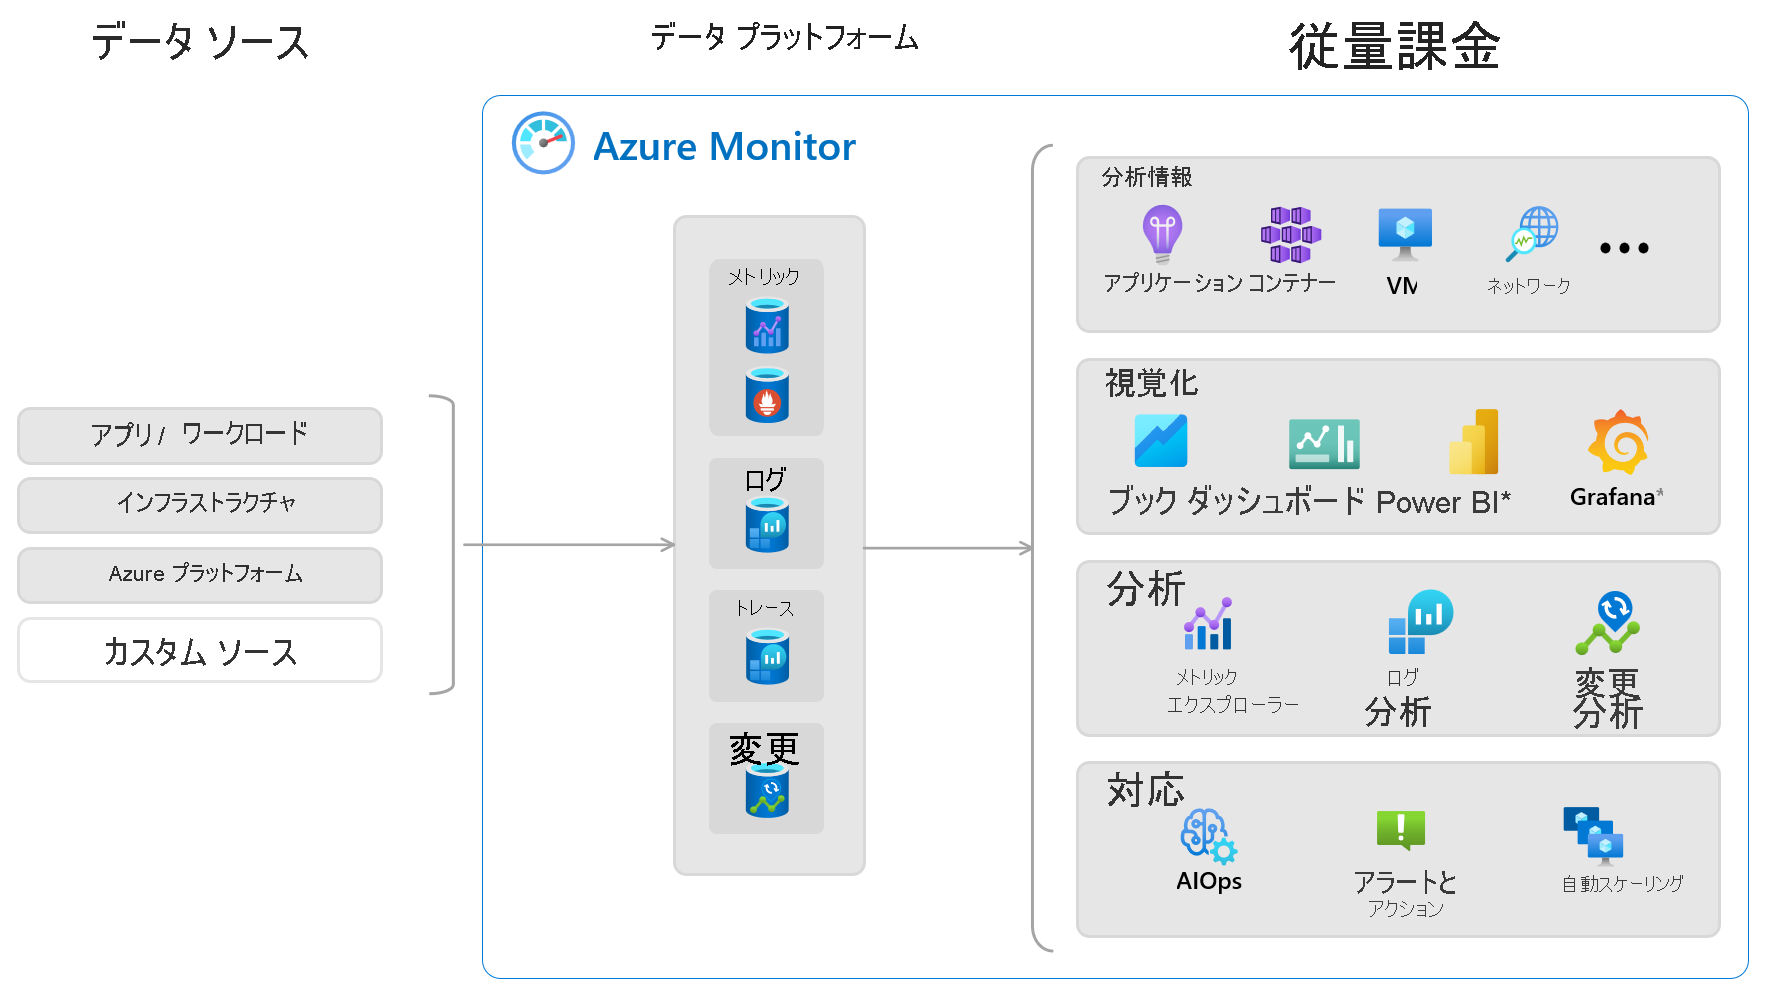 Diagram that shows an overview of Azure Monitor with data sources on the left and features that use the collected data at right.